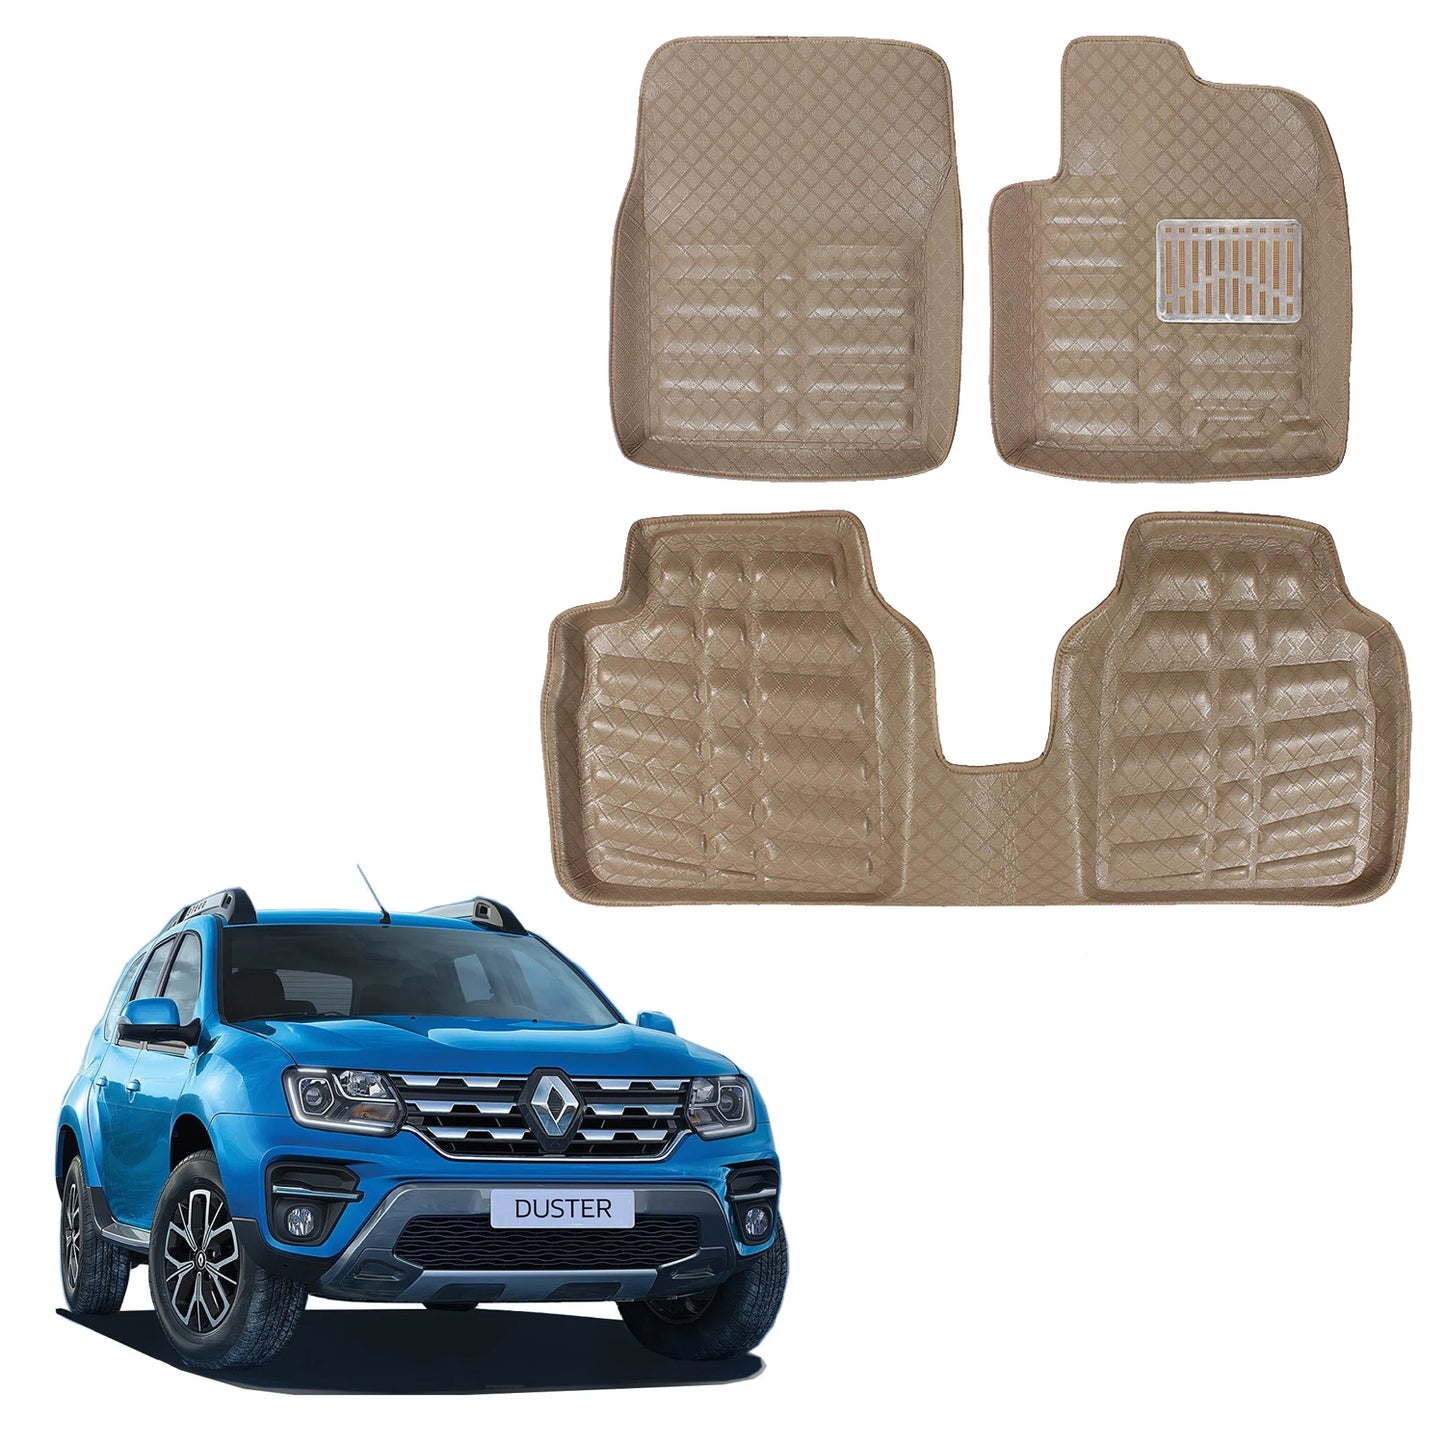 Oshotto 4D Artificial Leather Car Floor Mats For Renault Duster (2 Pieces Front and one Long Single Rear PC) -Set of 3 - Beige